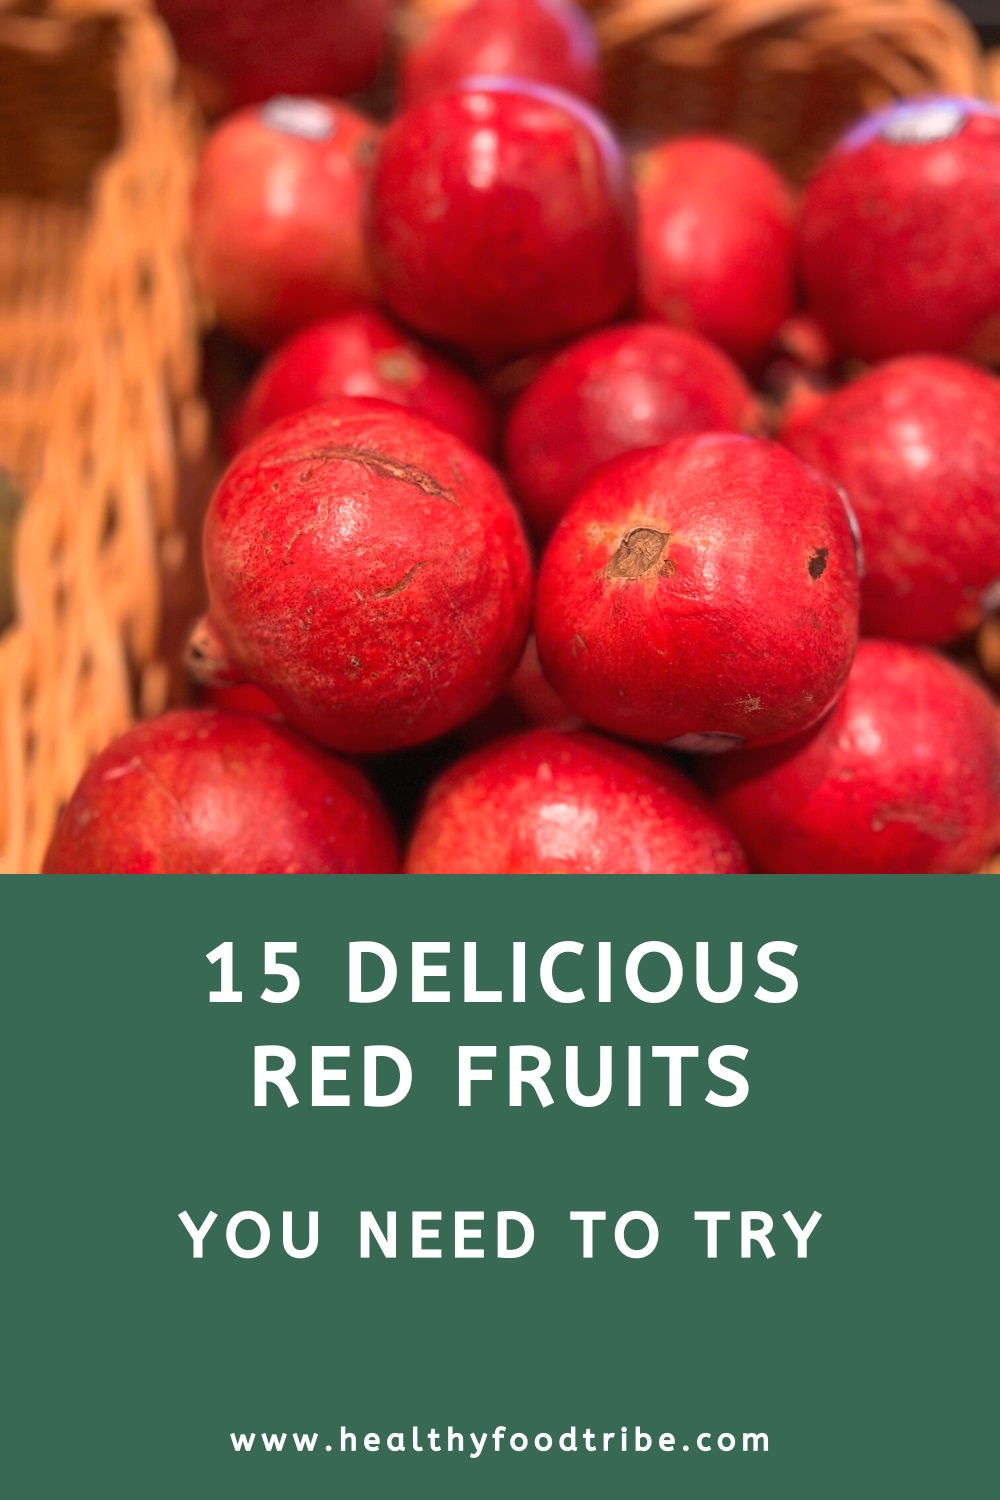 15 Delicious red fruits you need to try